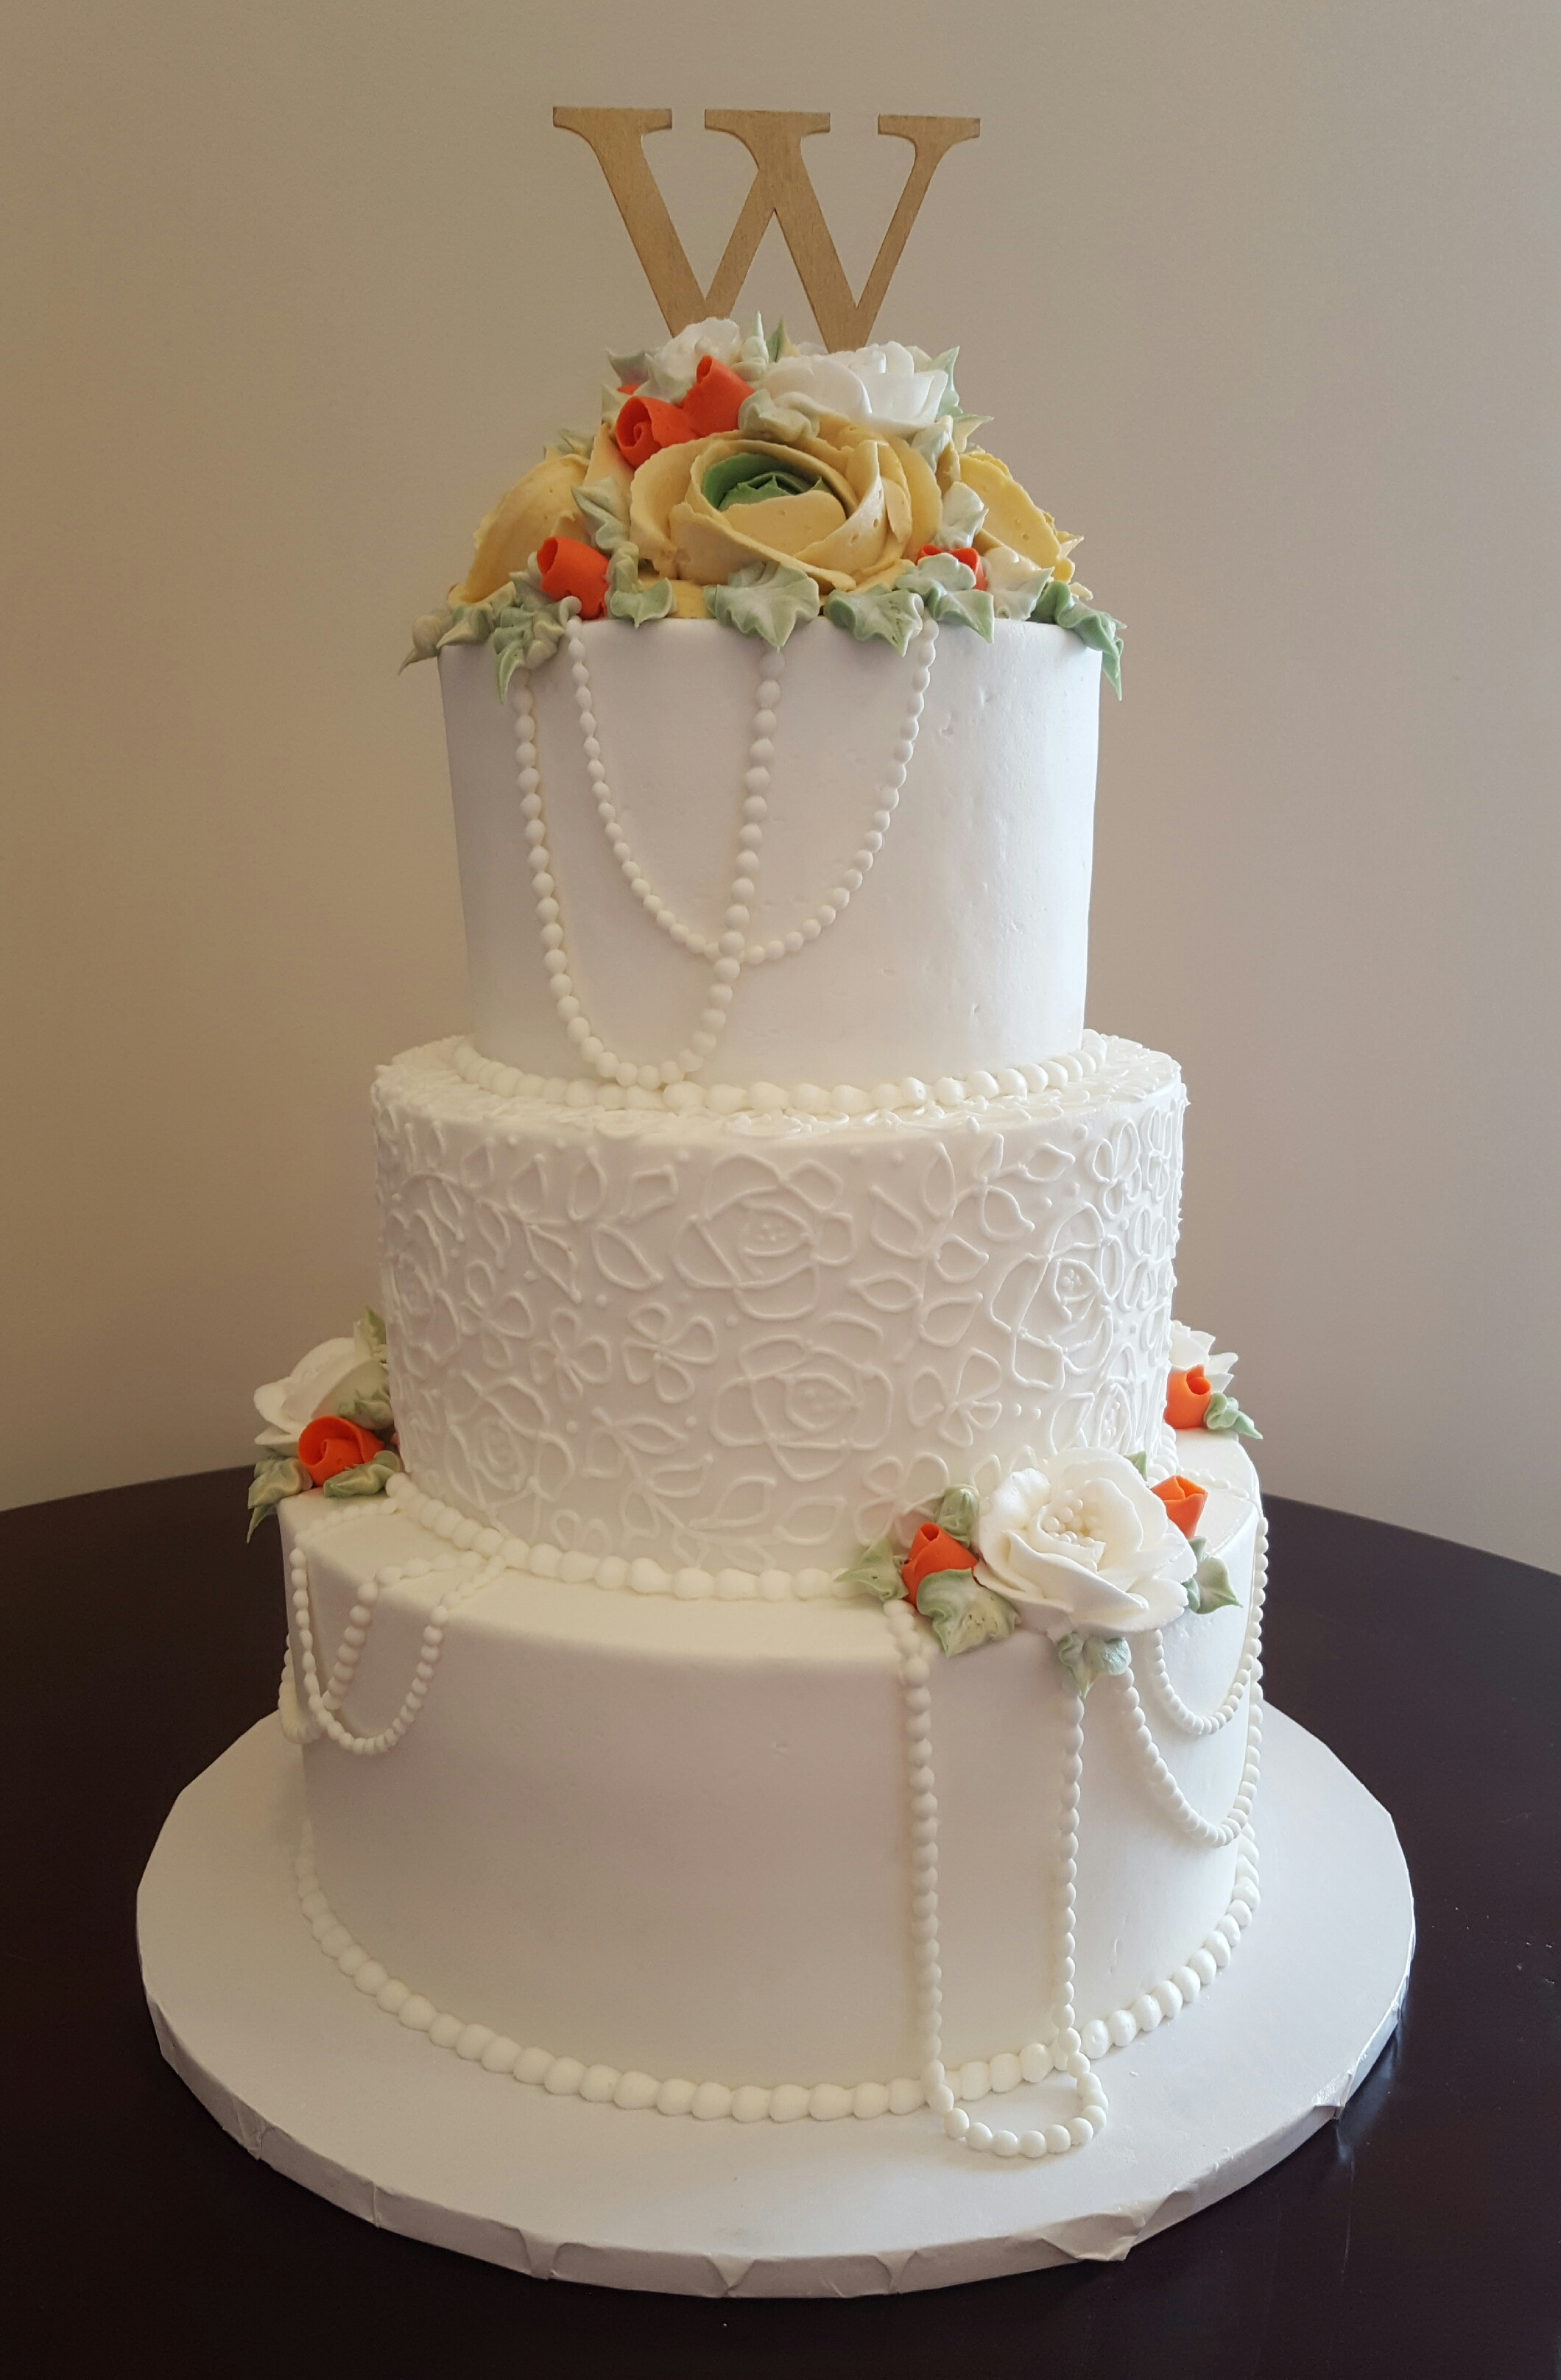 Wedding Cakes Mpls the top 20 Ideas About Check Out Our Gallery Of Wedding Cake In